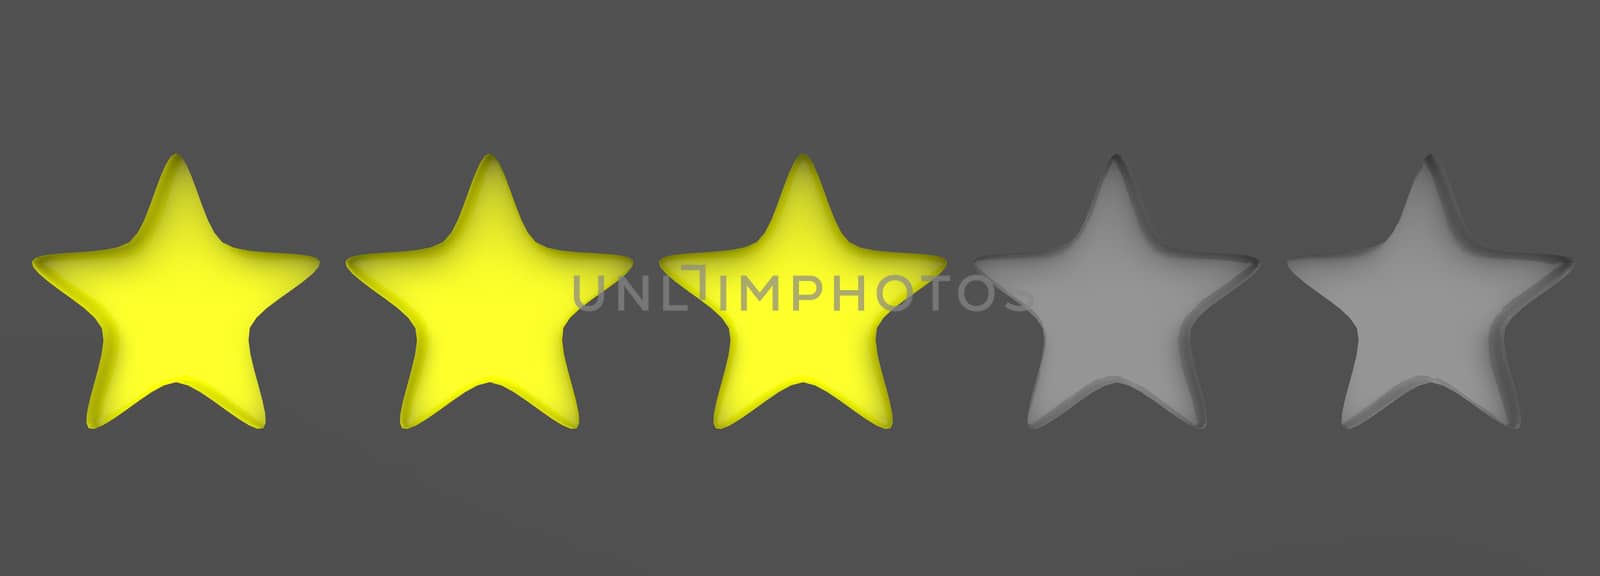 3d yellow three star on color background. Render and illustration of golden star for premium review by Andreajk3